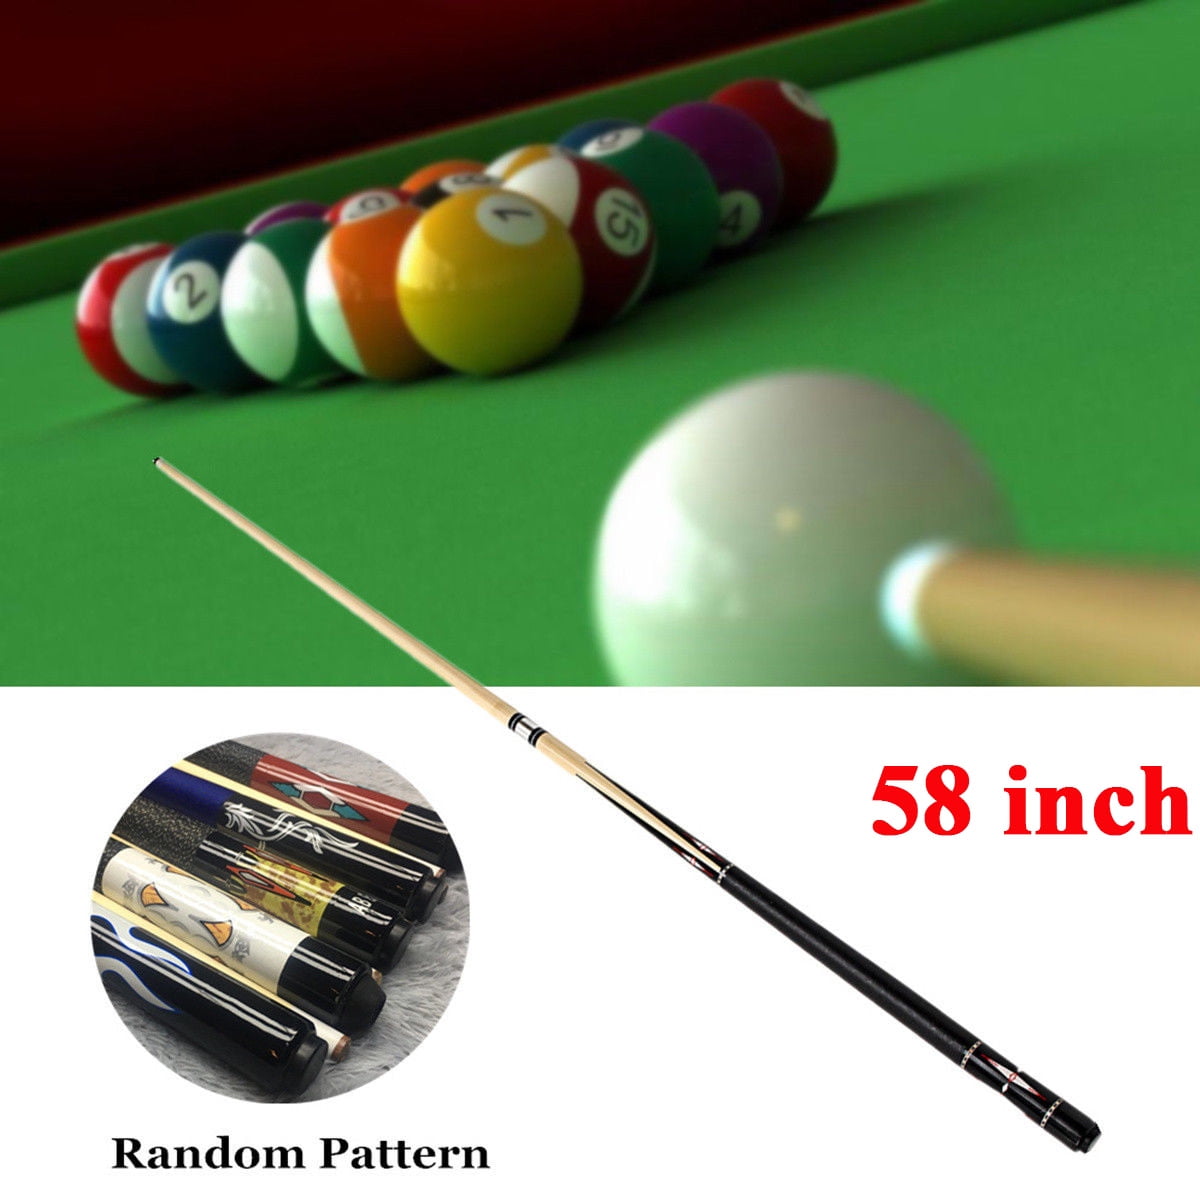 NEW 4 Pack Billiard House Pool Cue Sticks Bar Table Hardwood Wooden Accessories 